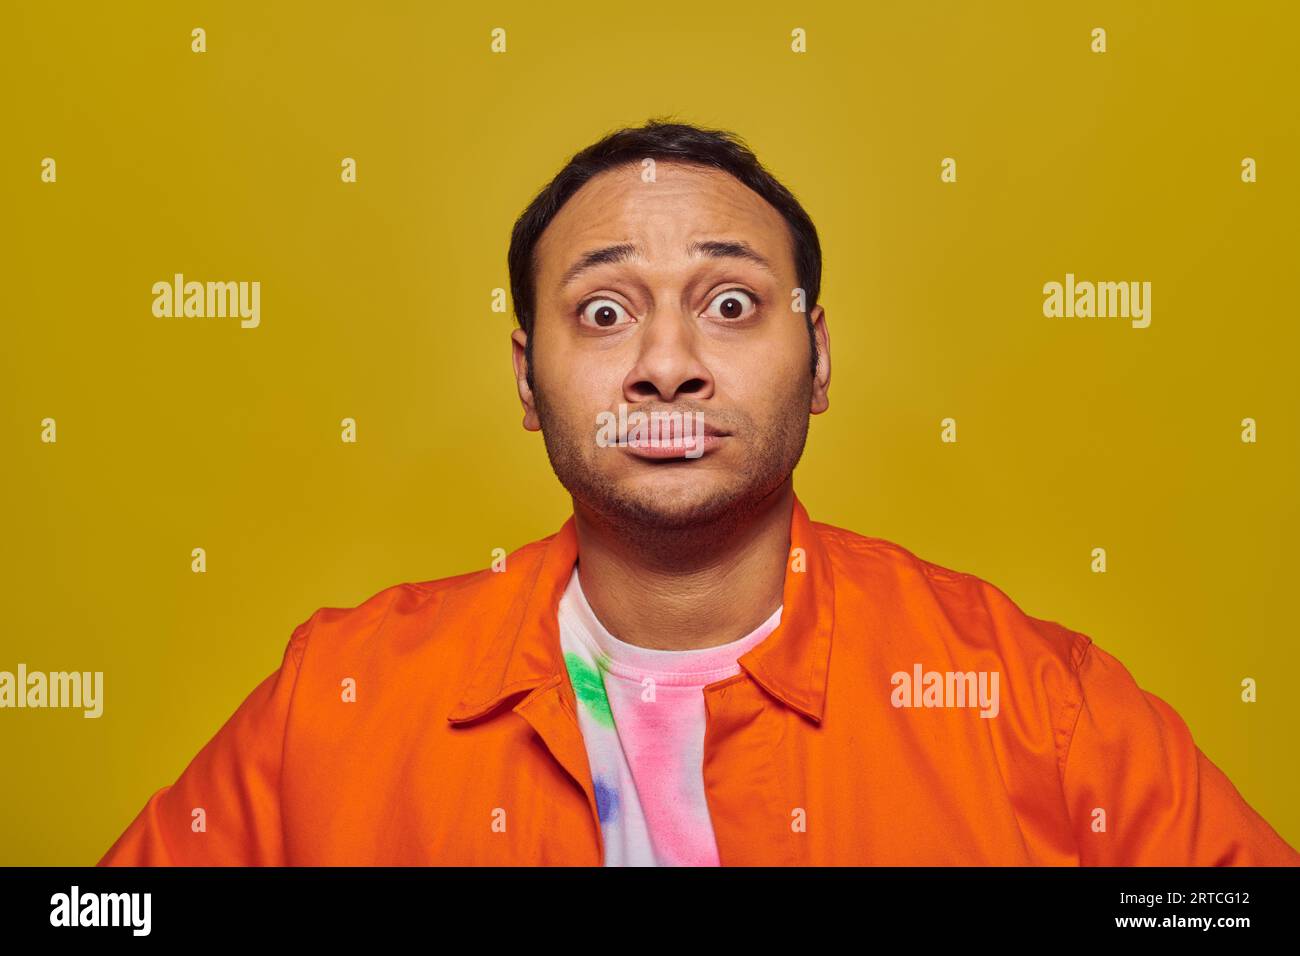 shocked indian man with eyes wide open looking at camera isolated on yellow, face expression Stock Photo